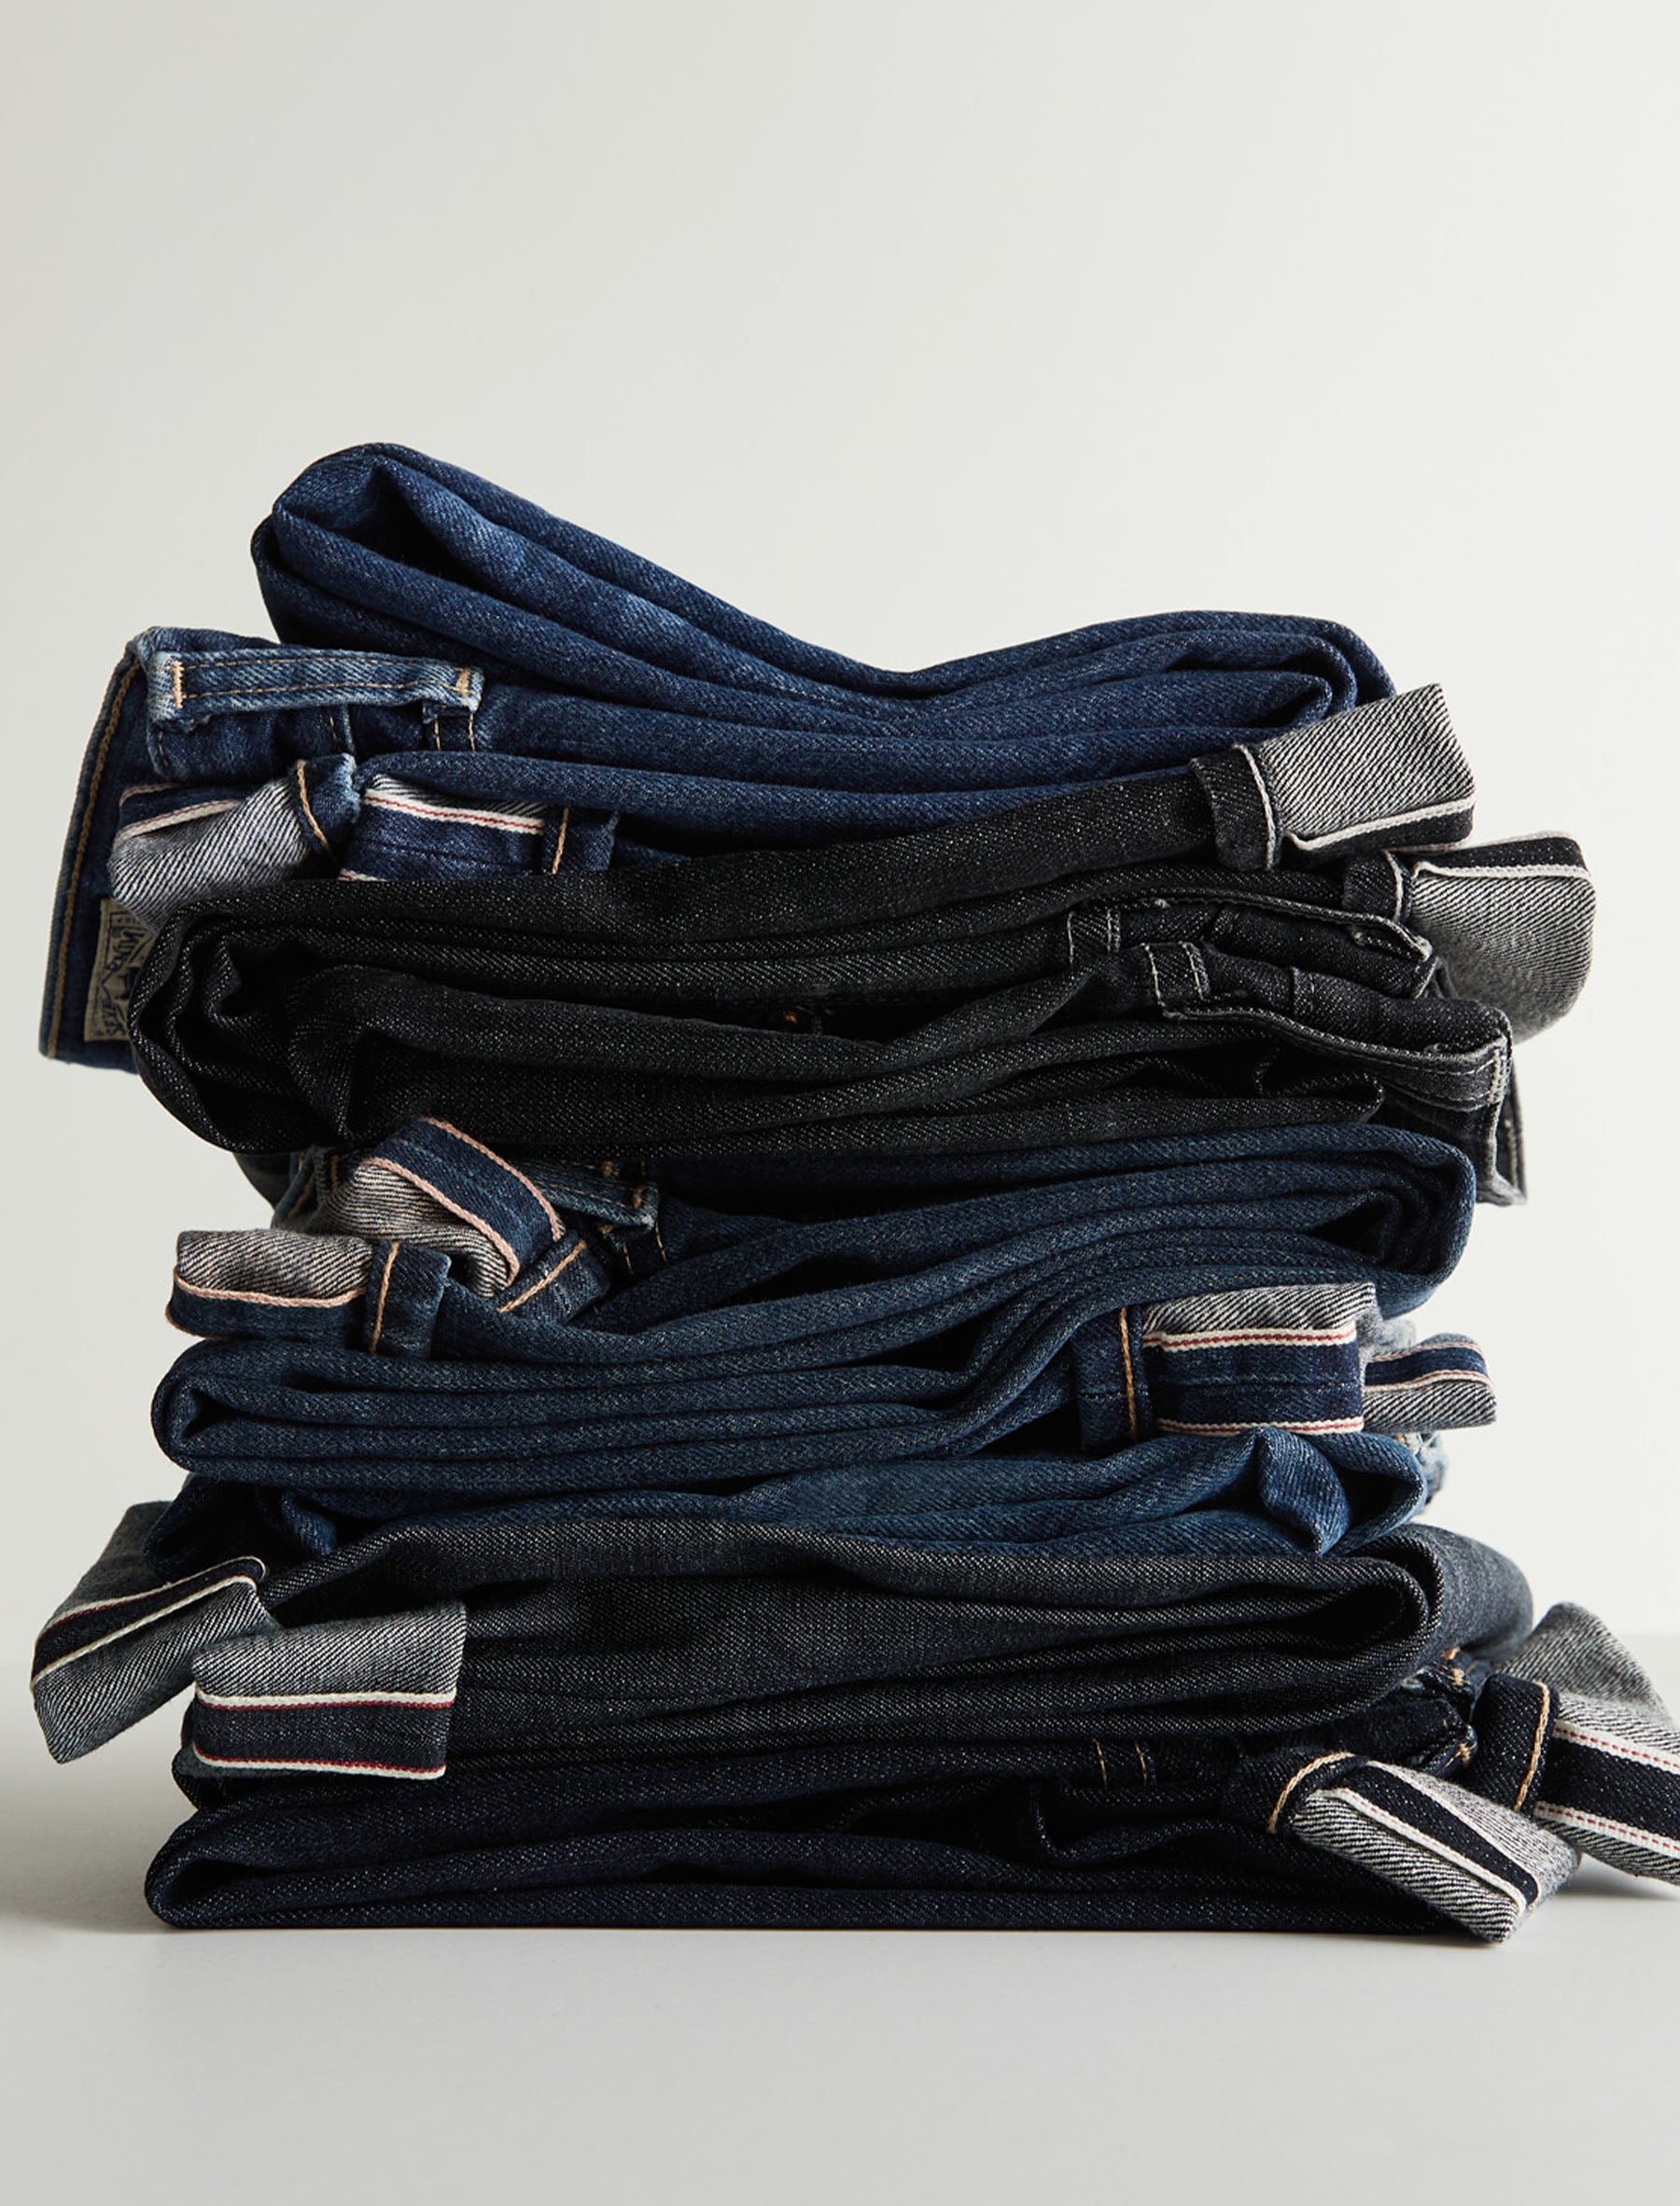 Shop Men's Denim and Knitswear at AG Jeans Official Store